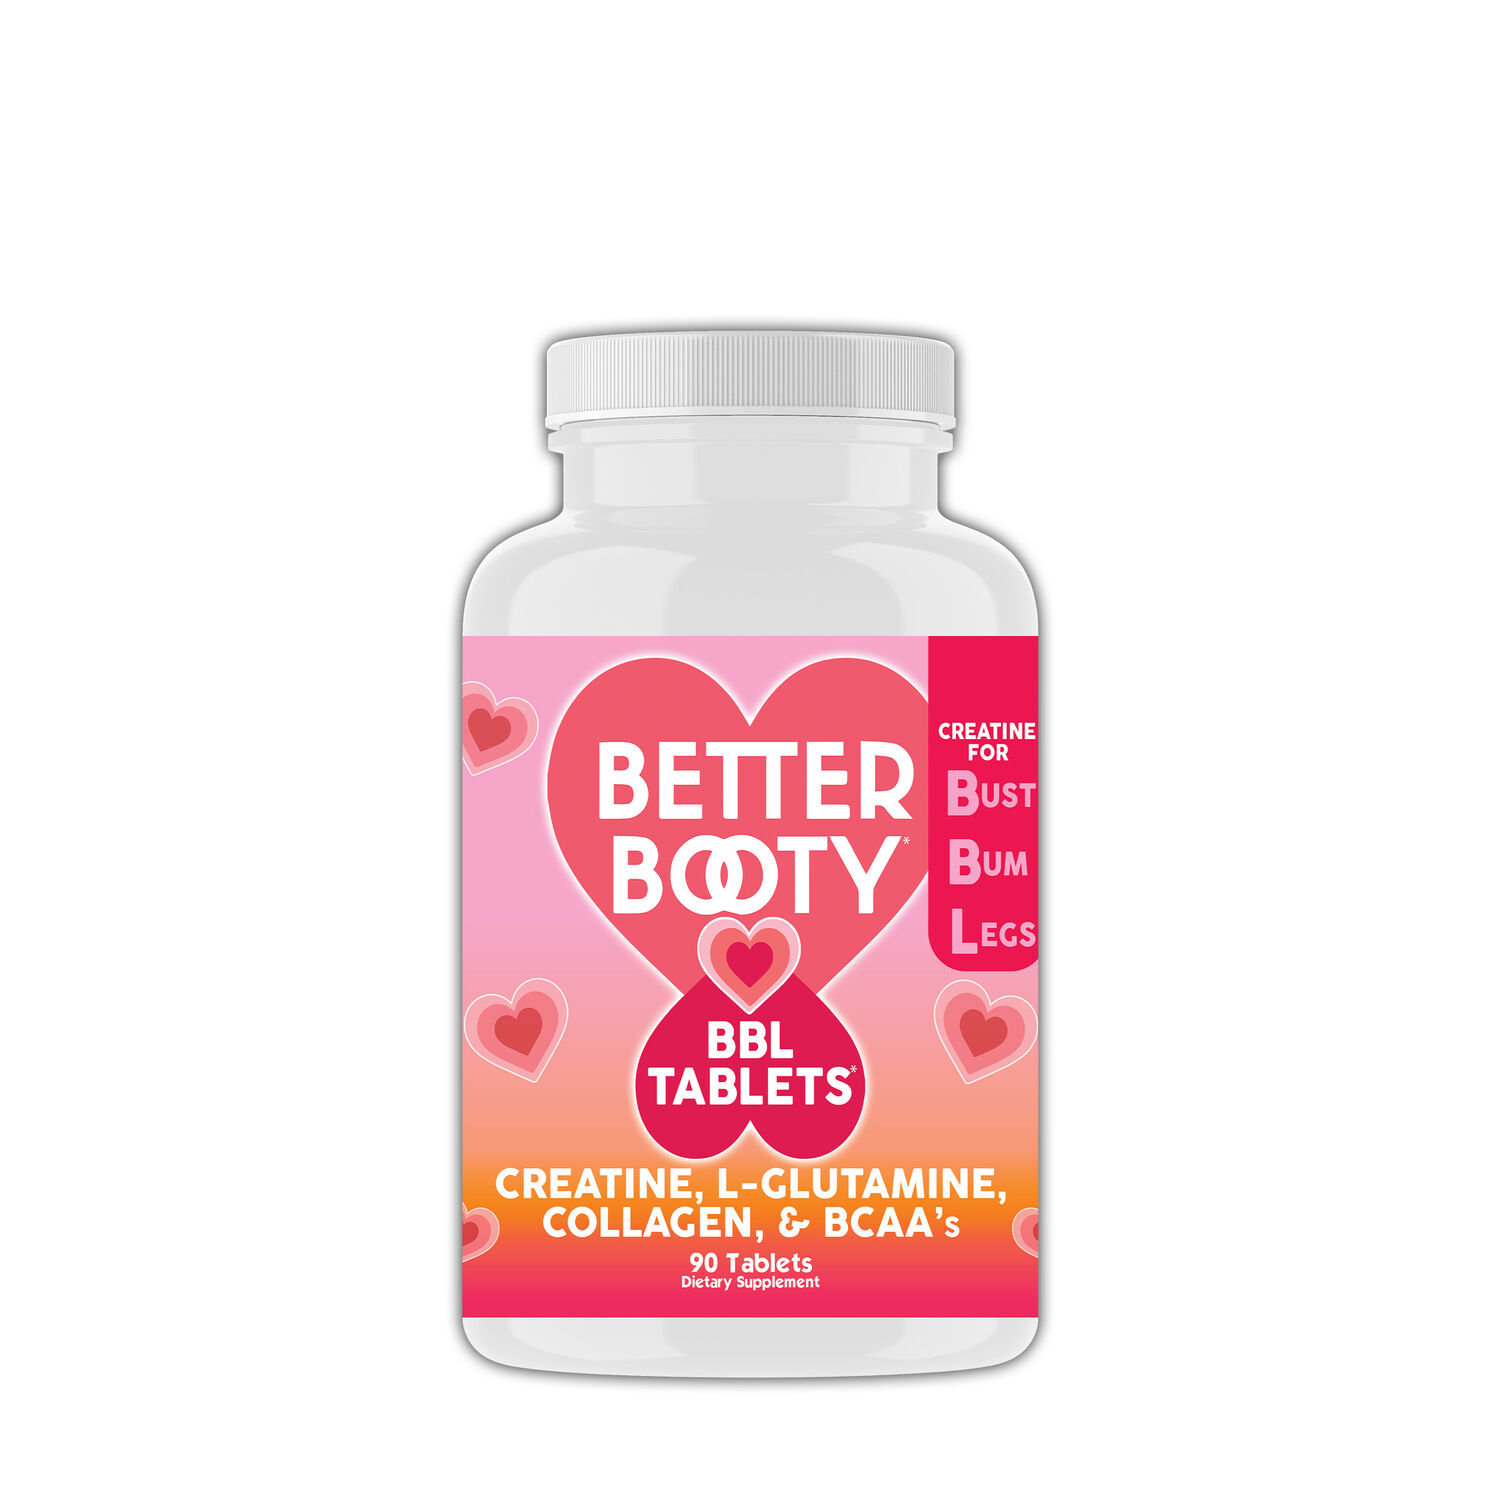 Angry Supplements Better Booty Bbl Creatine - 90 Tablets (30 Servings)